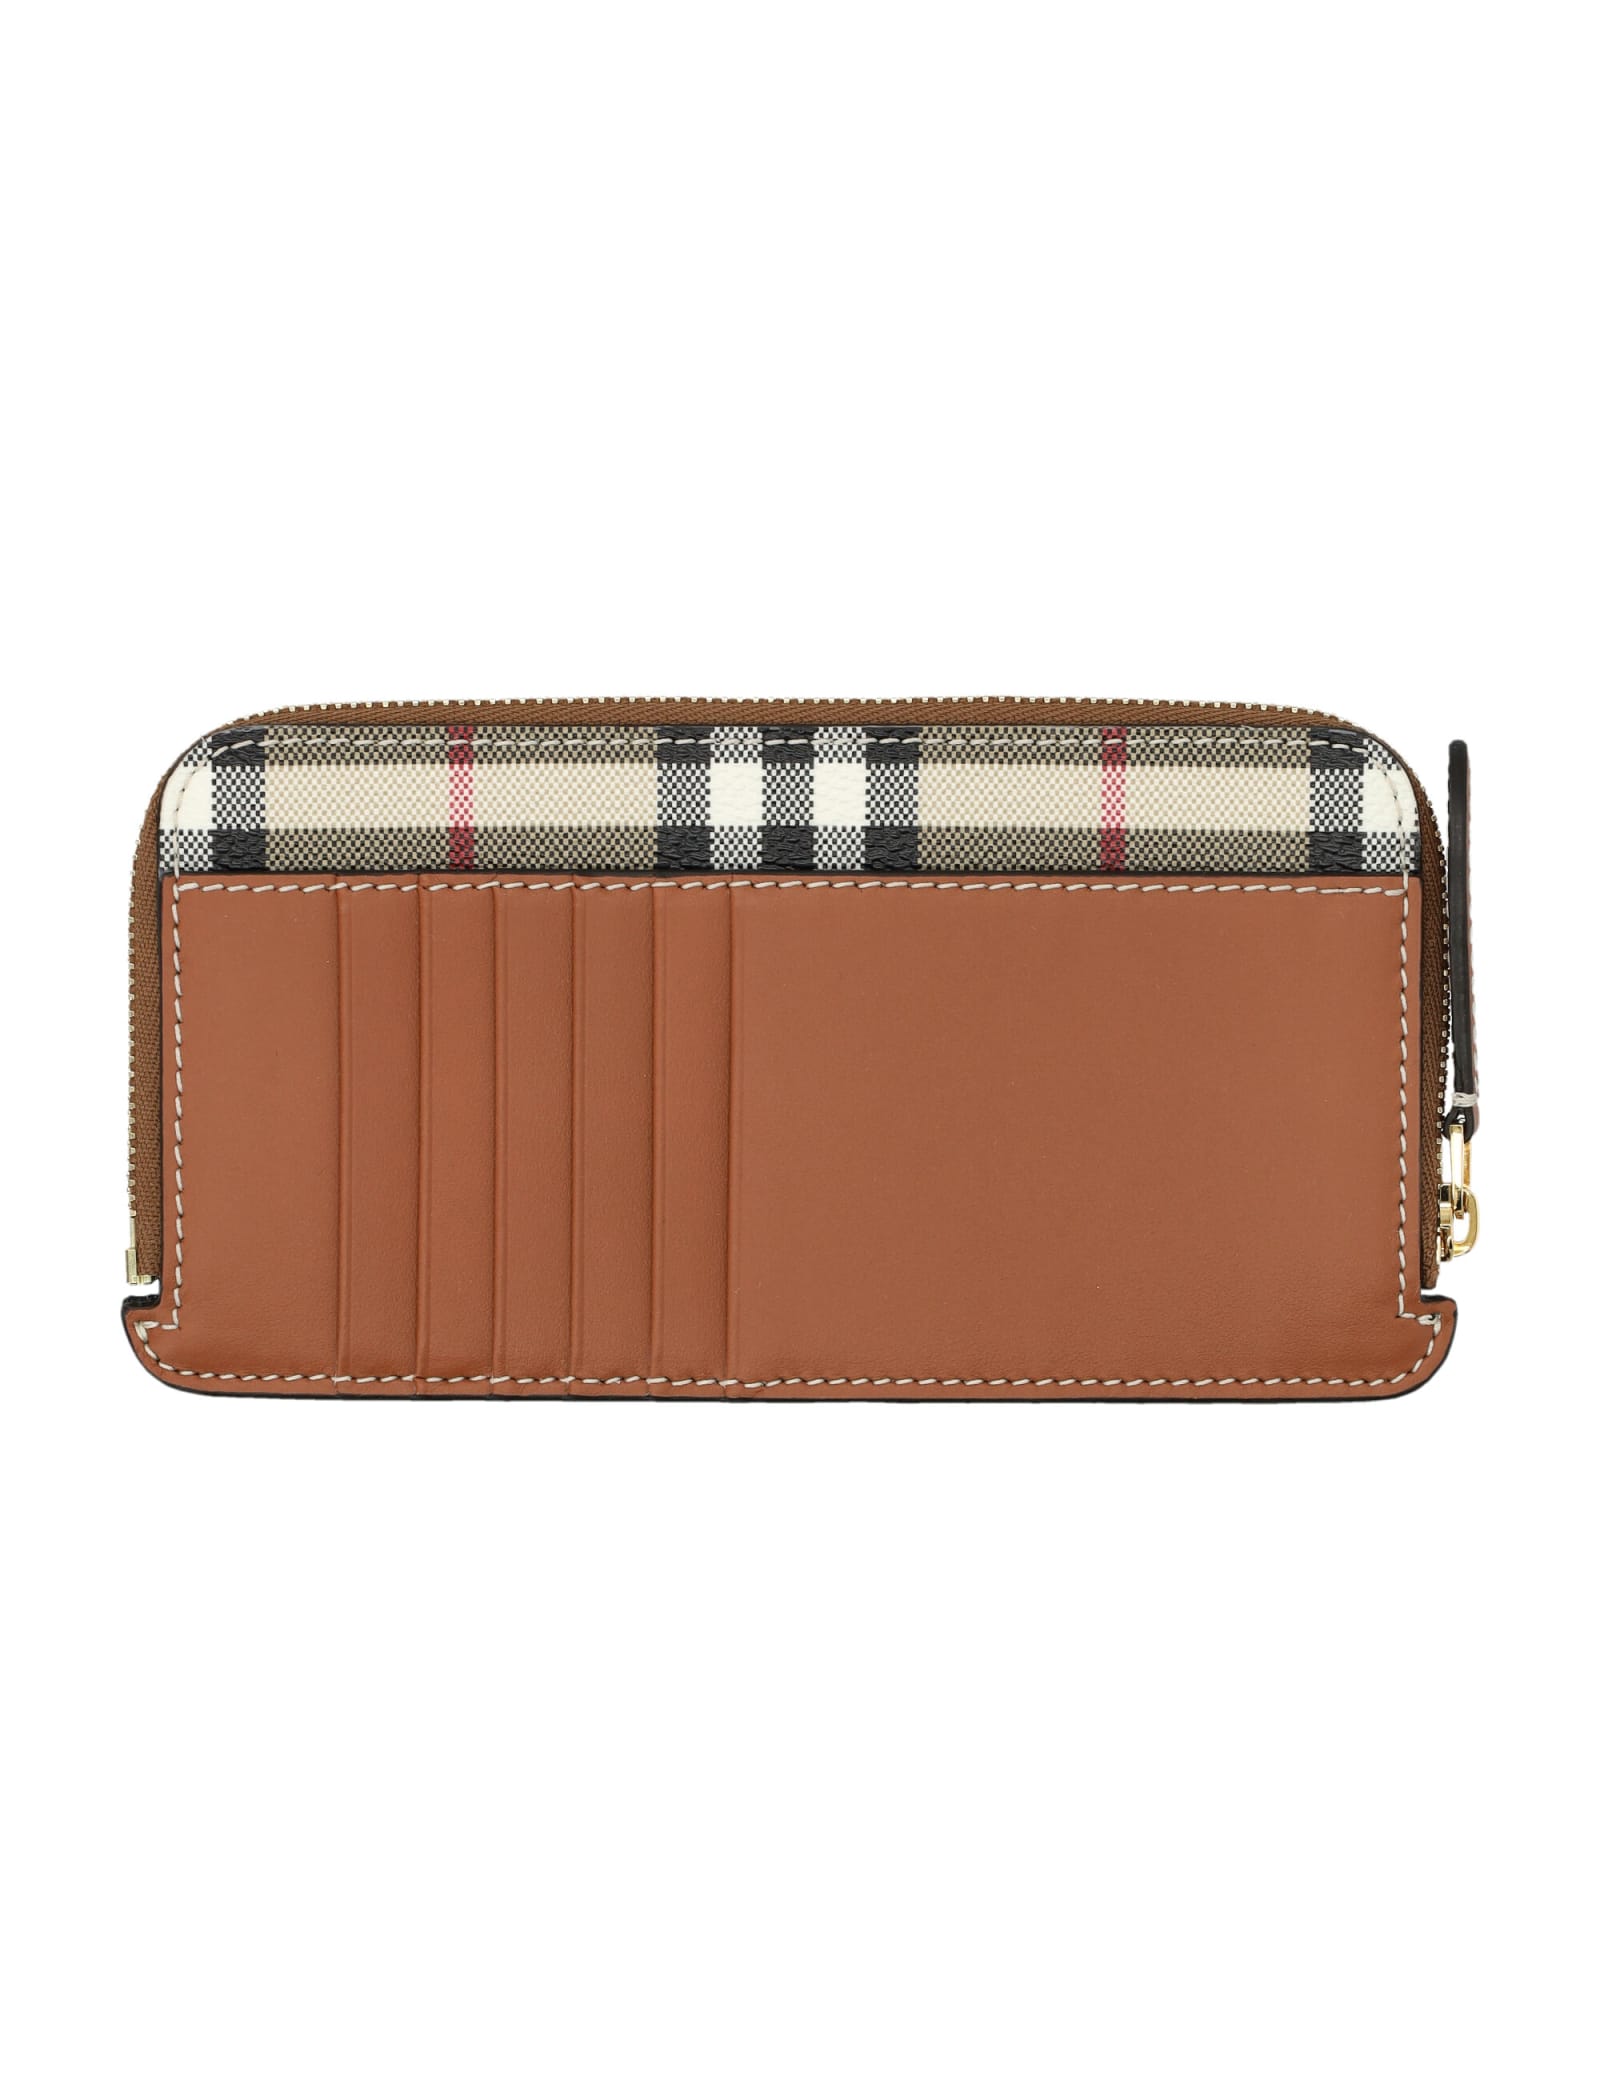 Shop Burberry Long Somerset Wallet In Archive Beige Check